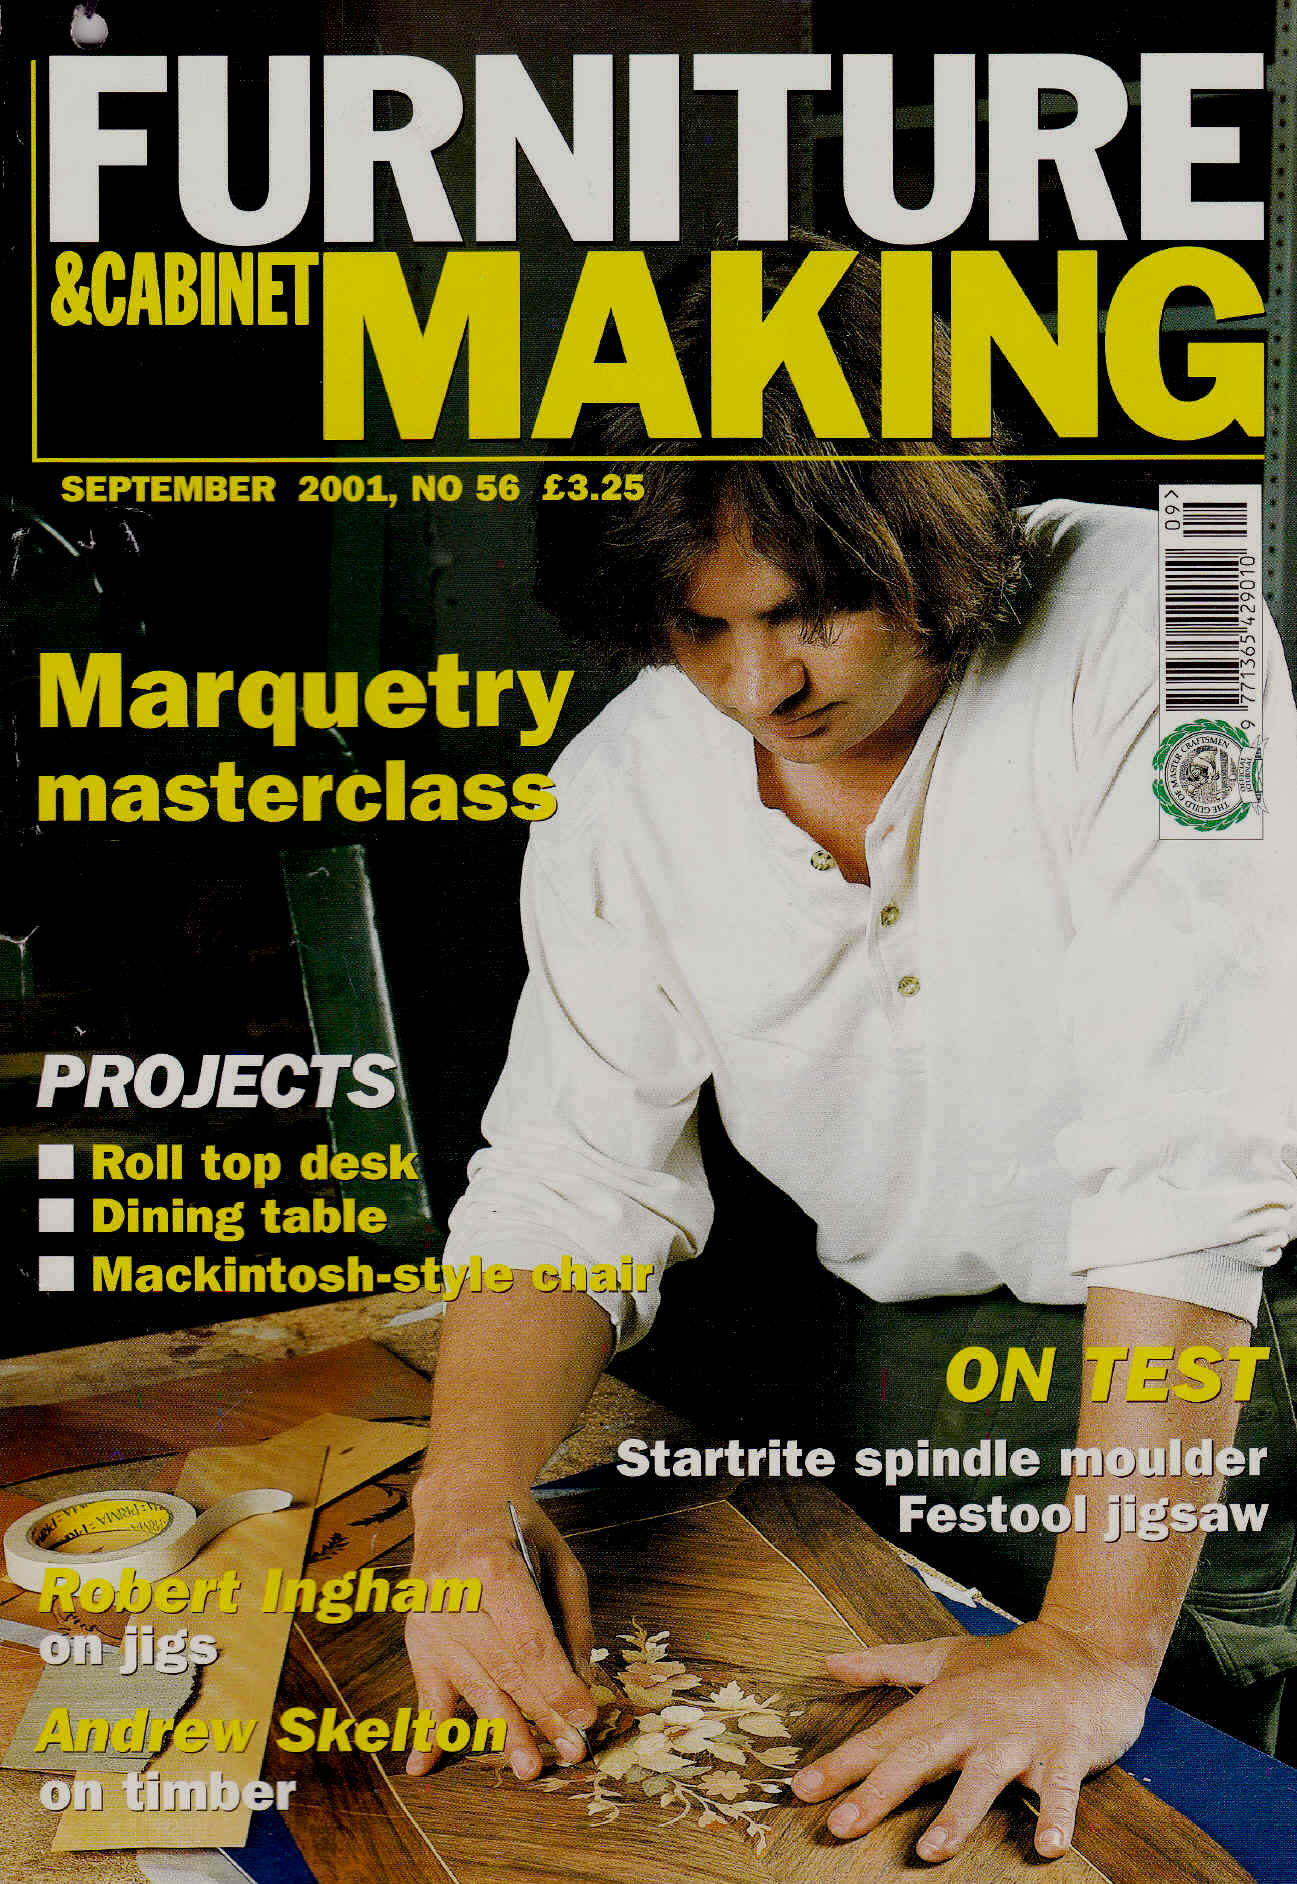 Joe features on the front cover of Furniture Making